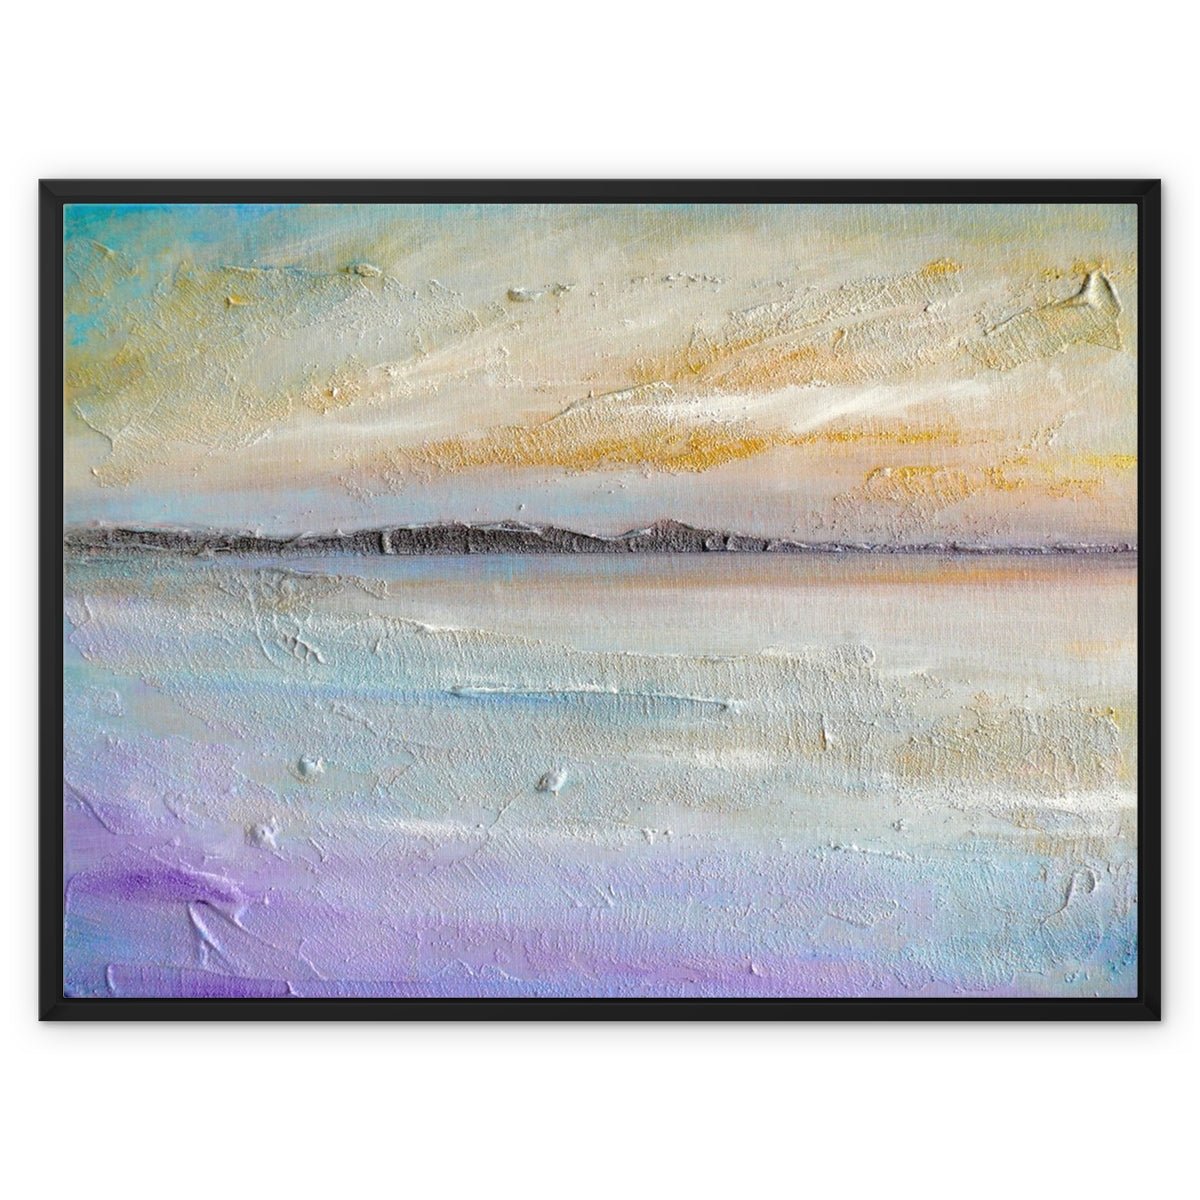 Sollas Beach North Uist Painting | Framed Canvas From Scotland-Floating Framed Canvas Prints-Hebridean Islands Art Gallery-32"x24"-Black Frame-Paintings, Prints, Homeware, Art Gifts From Scotland By Scottish Artist Kevin Hunter